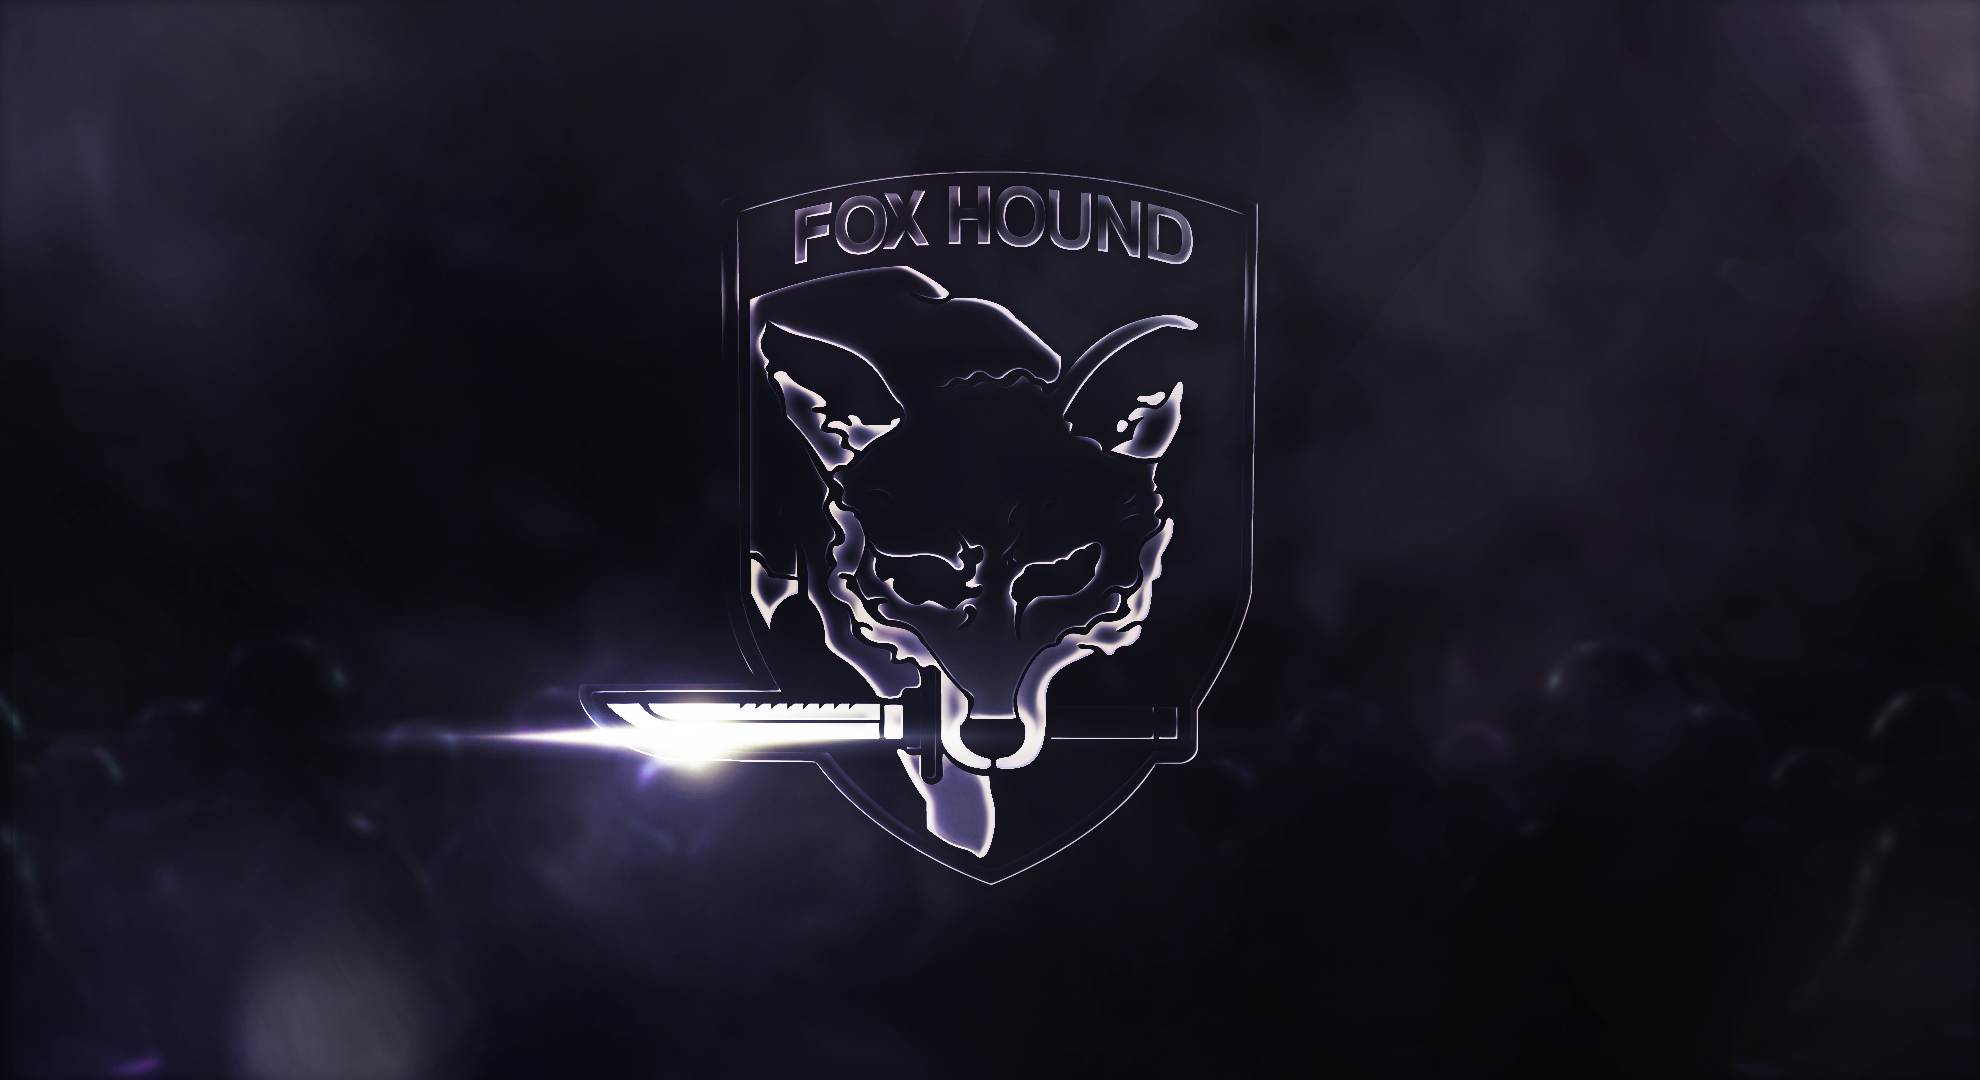 Foxhound Logo Images amp Pictures   Becuo